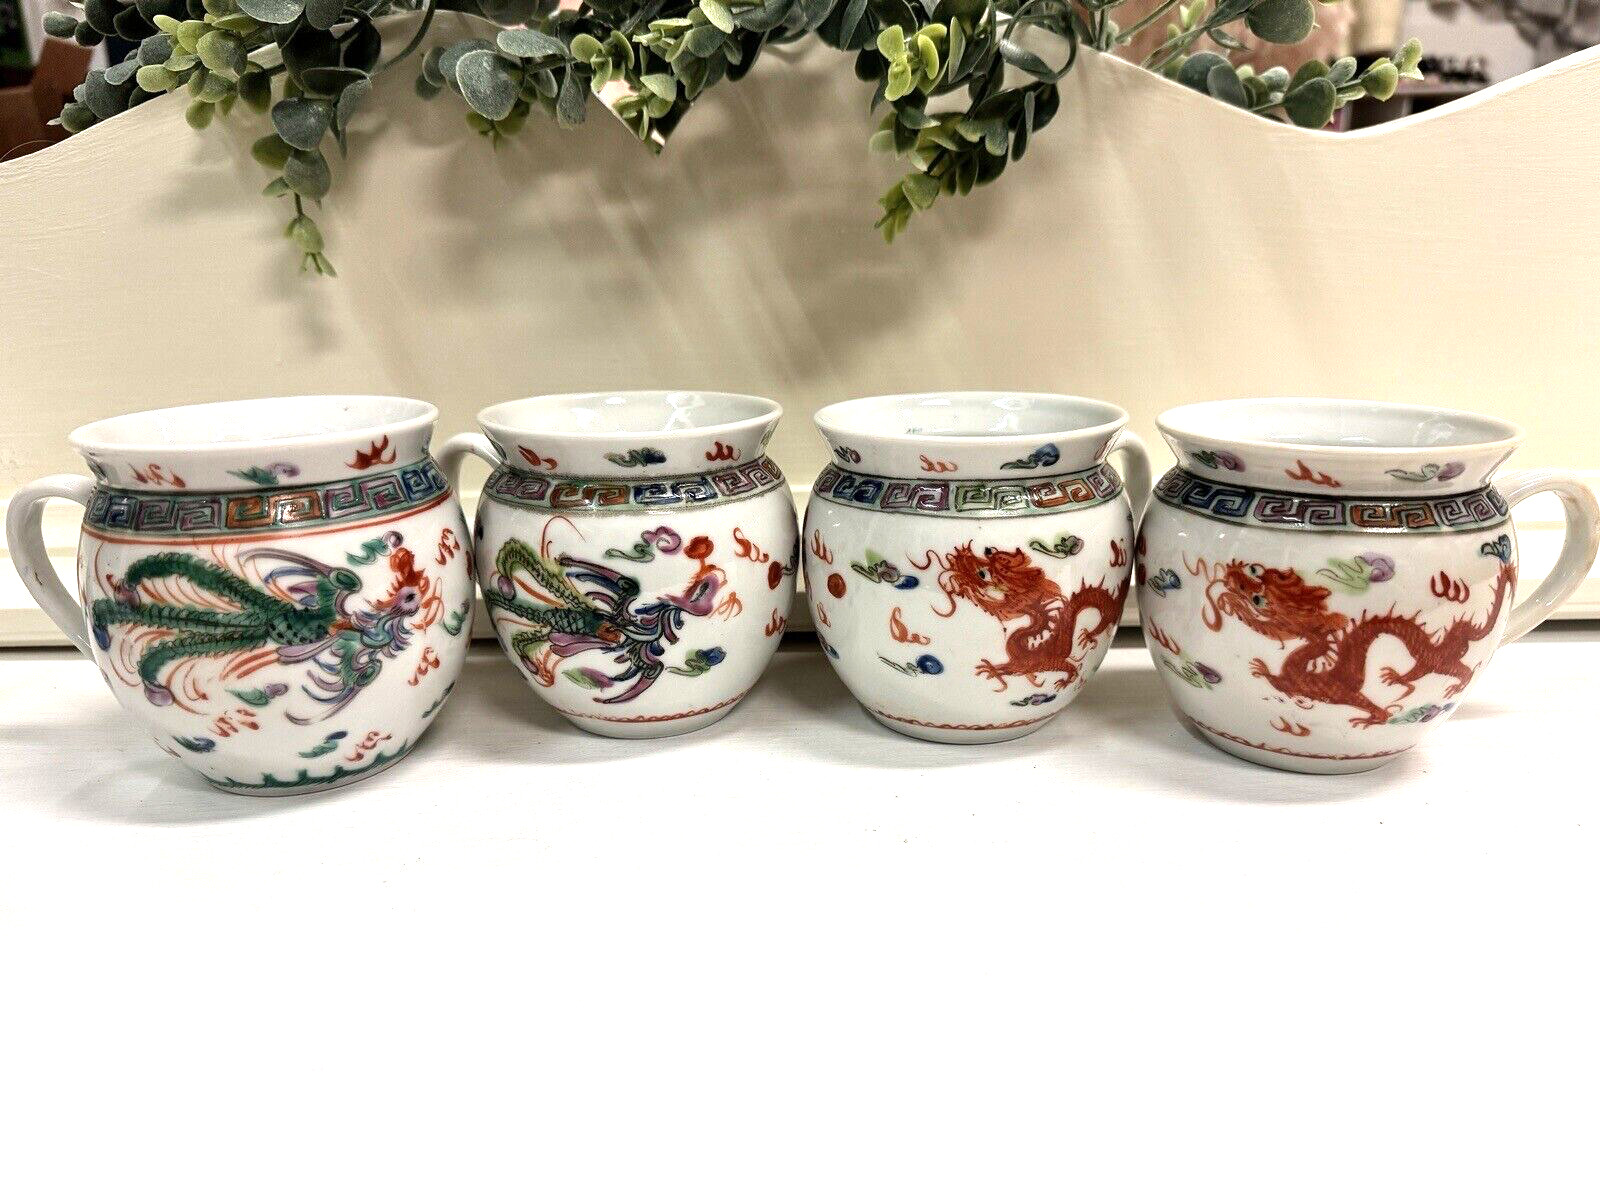 RARE Set of 4 Vtg Hand Painted Chinese Famille Rose Porcelain Cups Side Handles